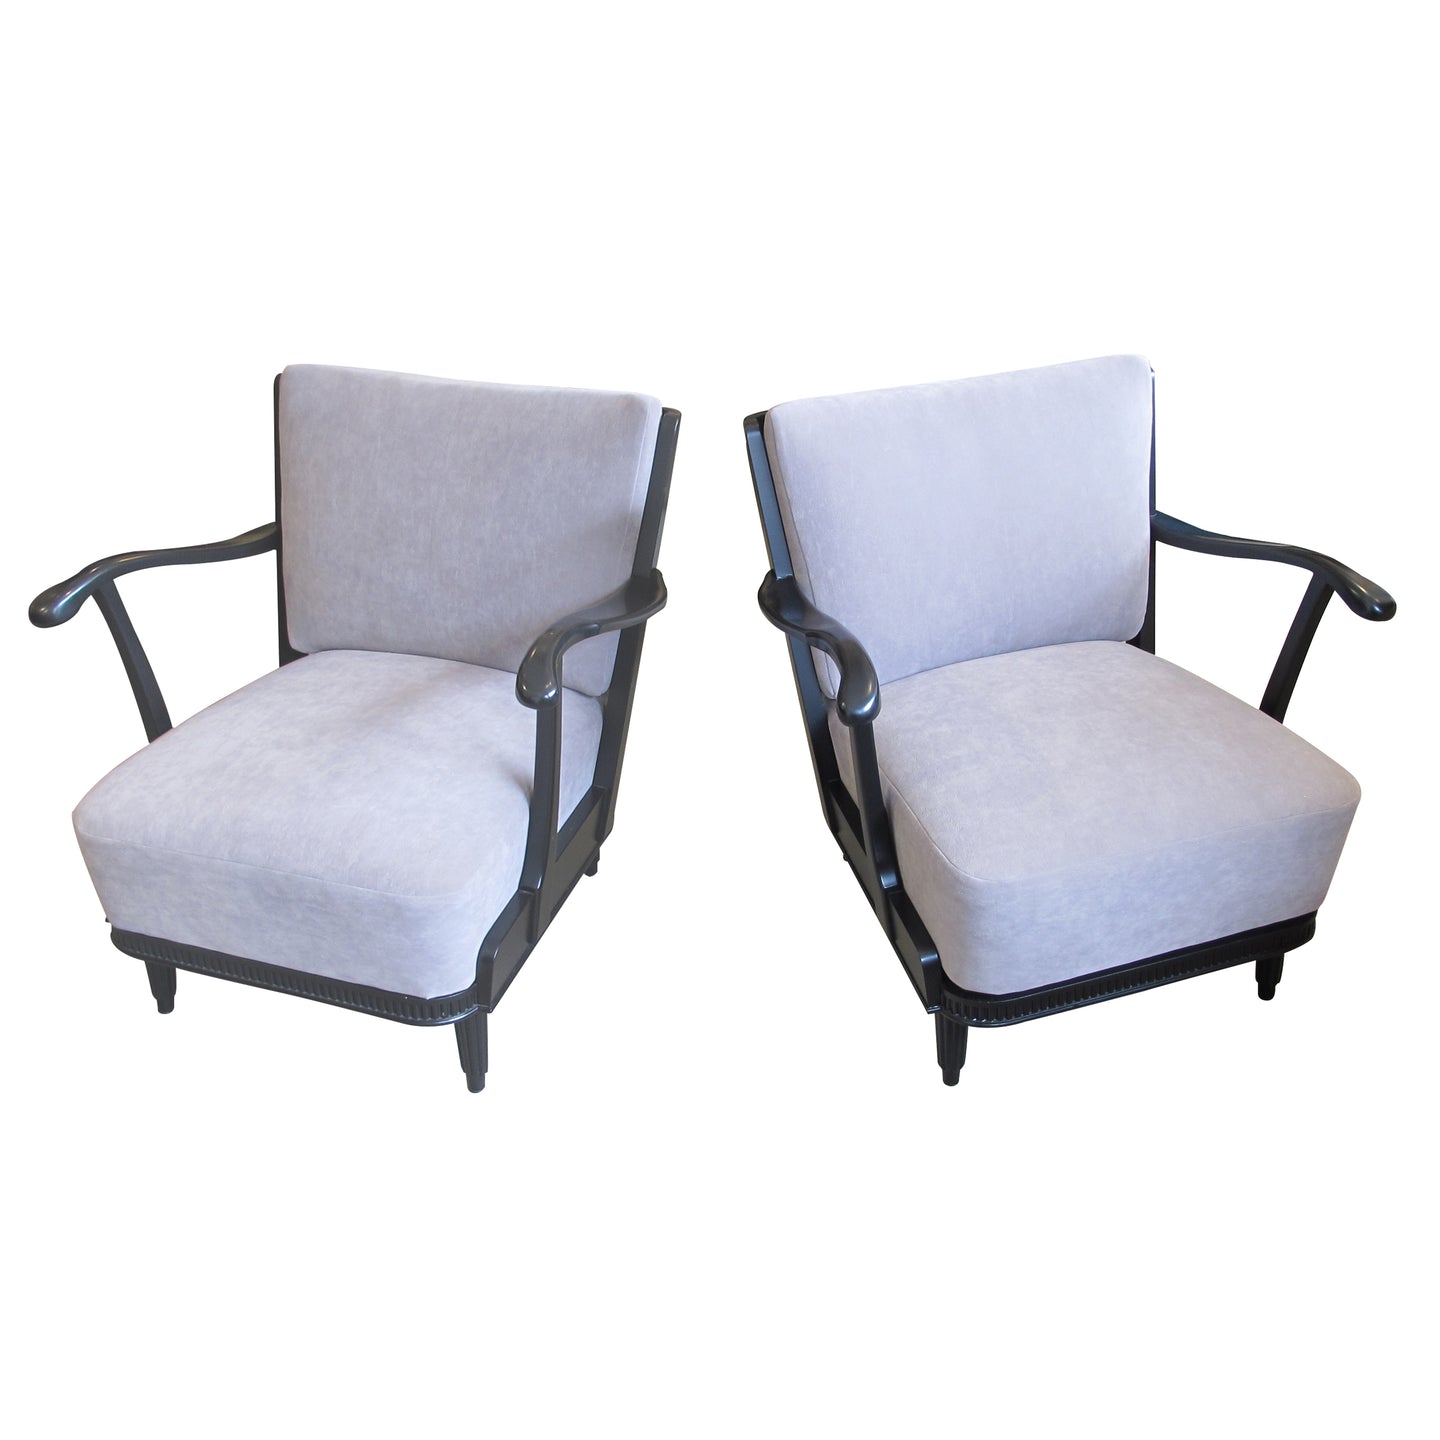 A pair of 1940's Swedish armchairs with ebonised frame